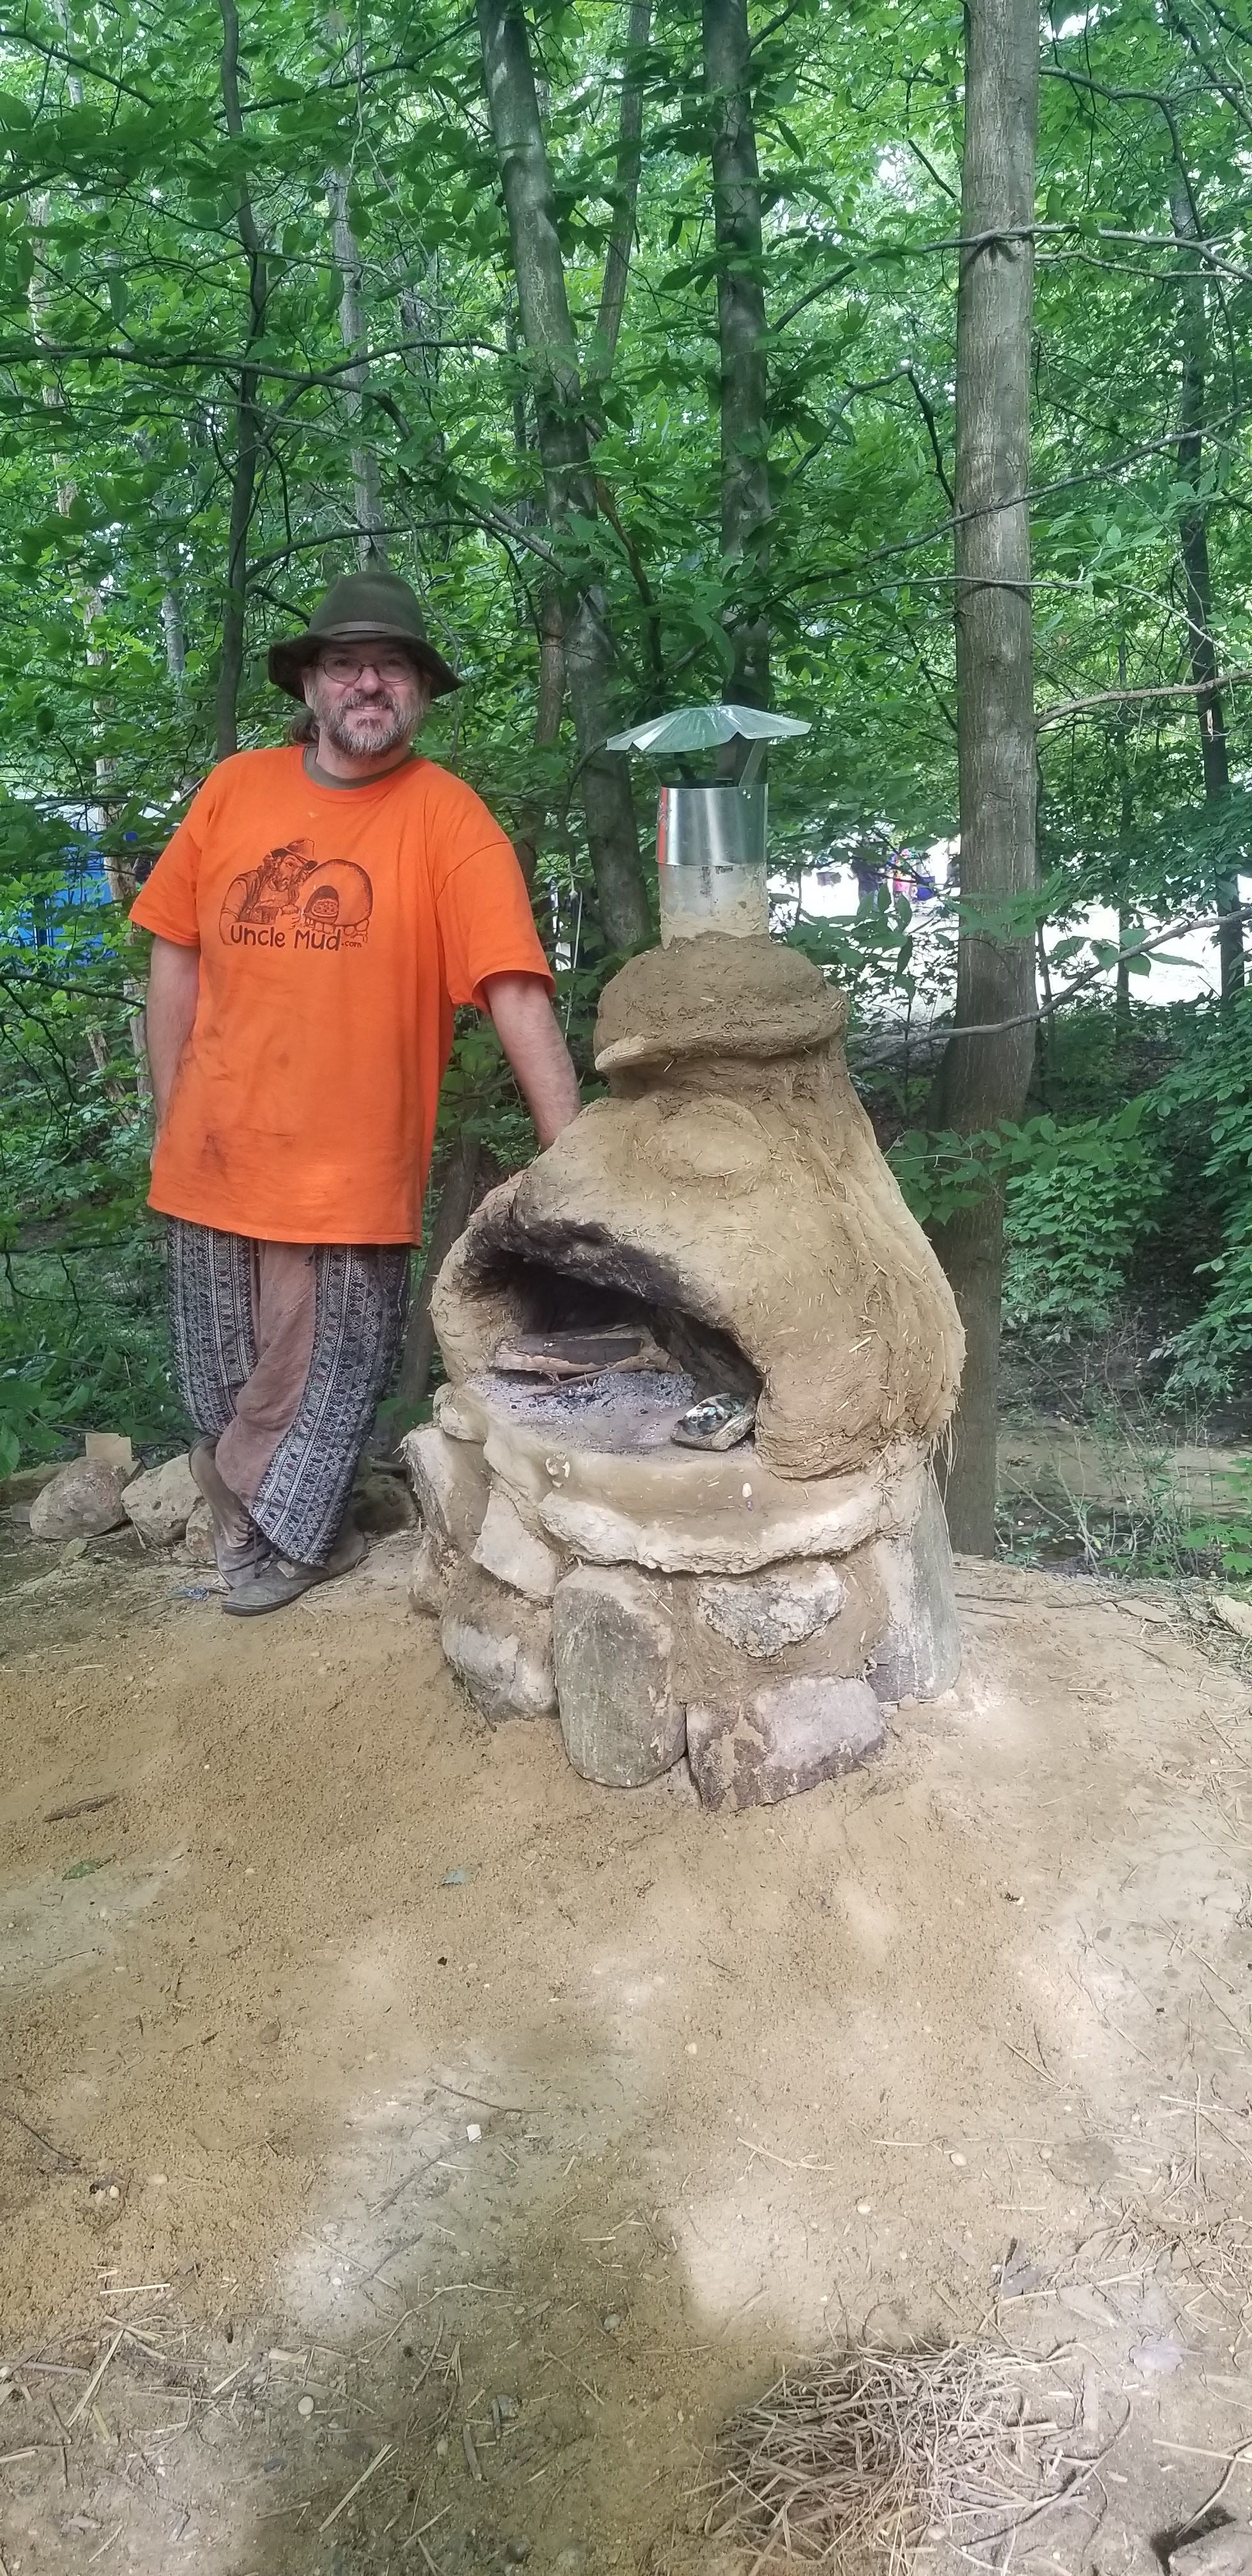 Posing with the Earthen Cob Oven